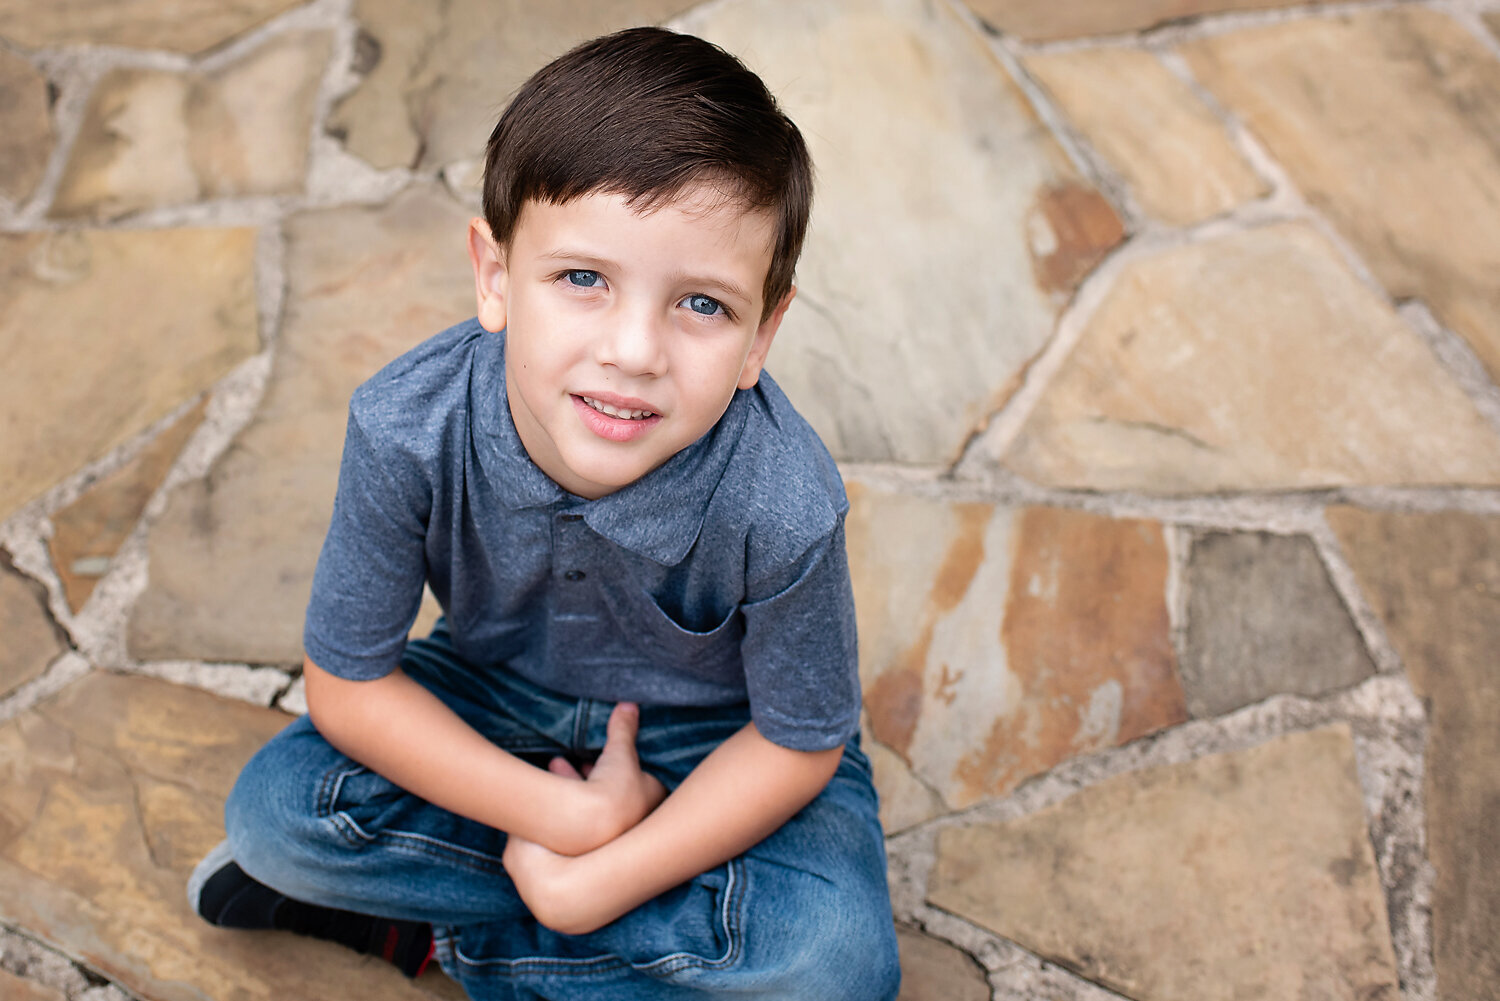 Young boy with beautiful blue eyes sitting on a stone path and gazing into the camera.